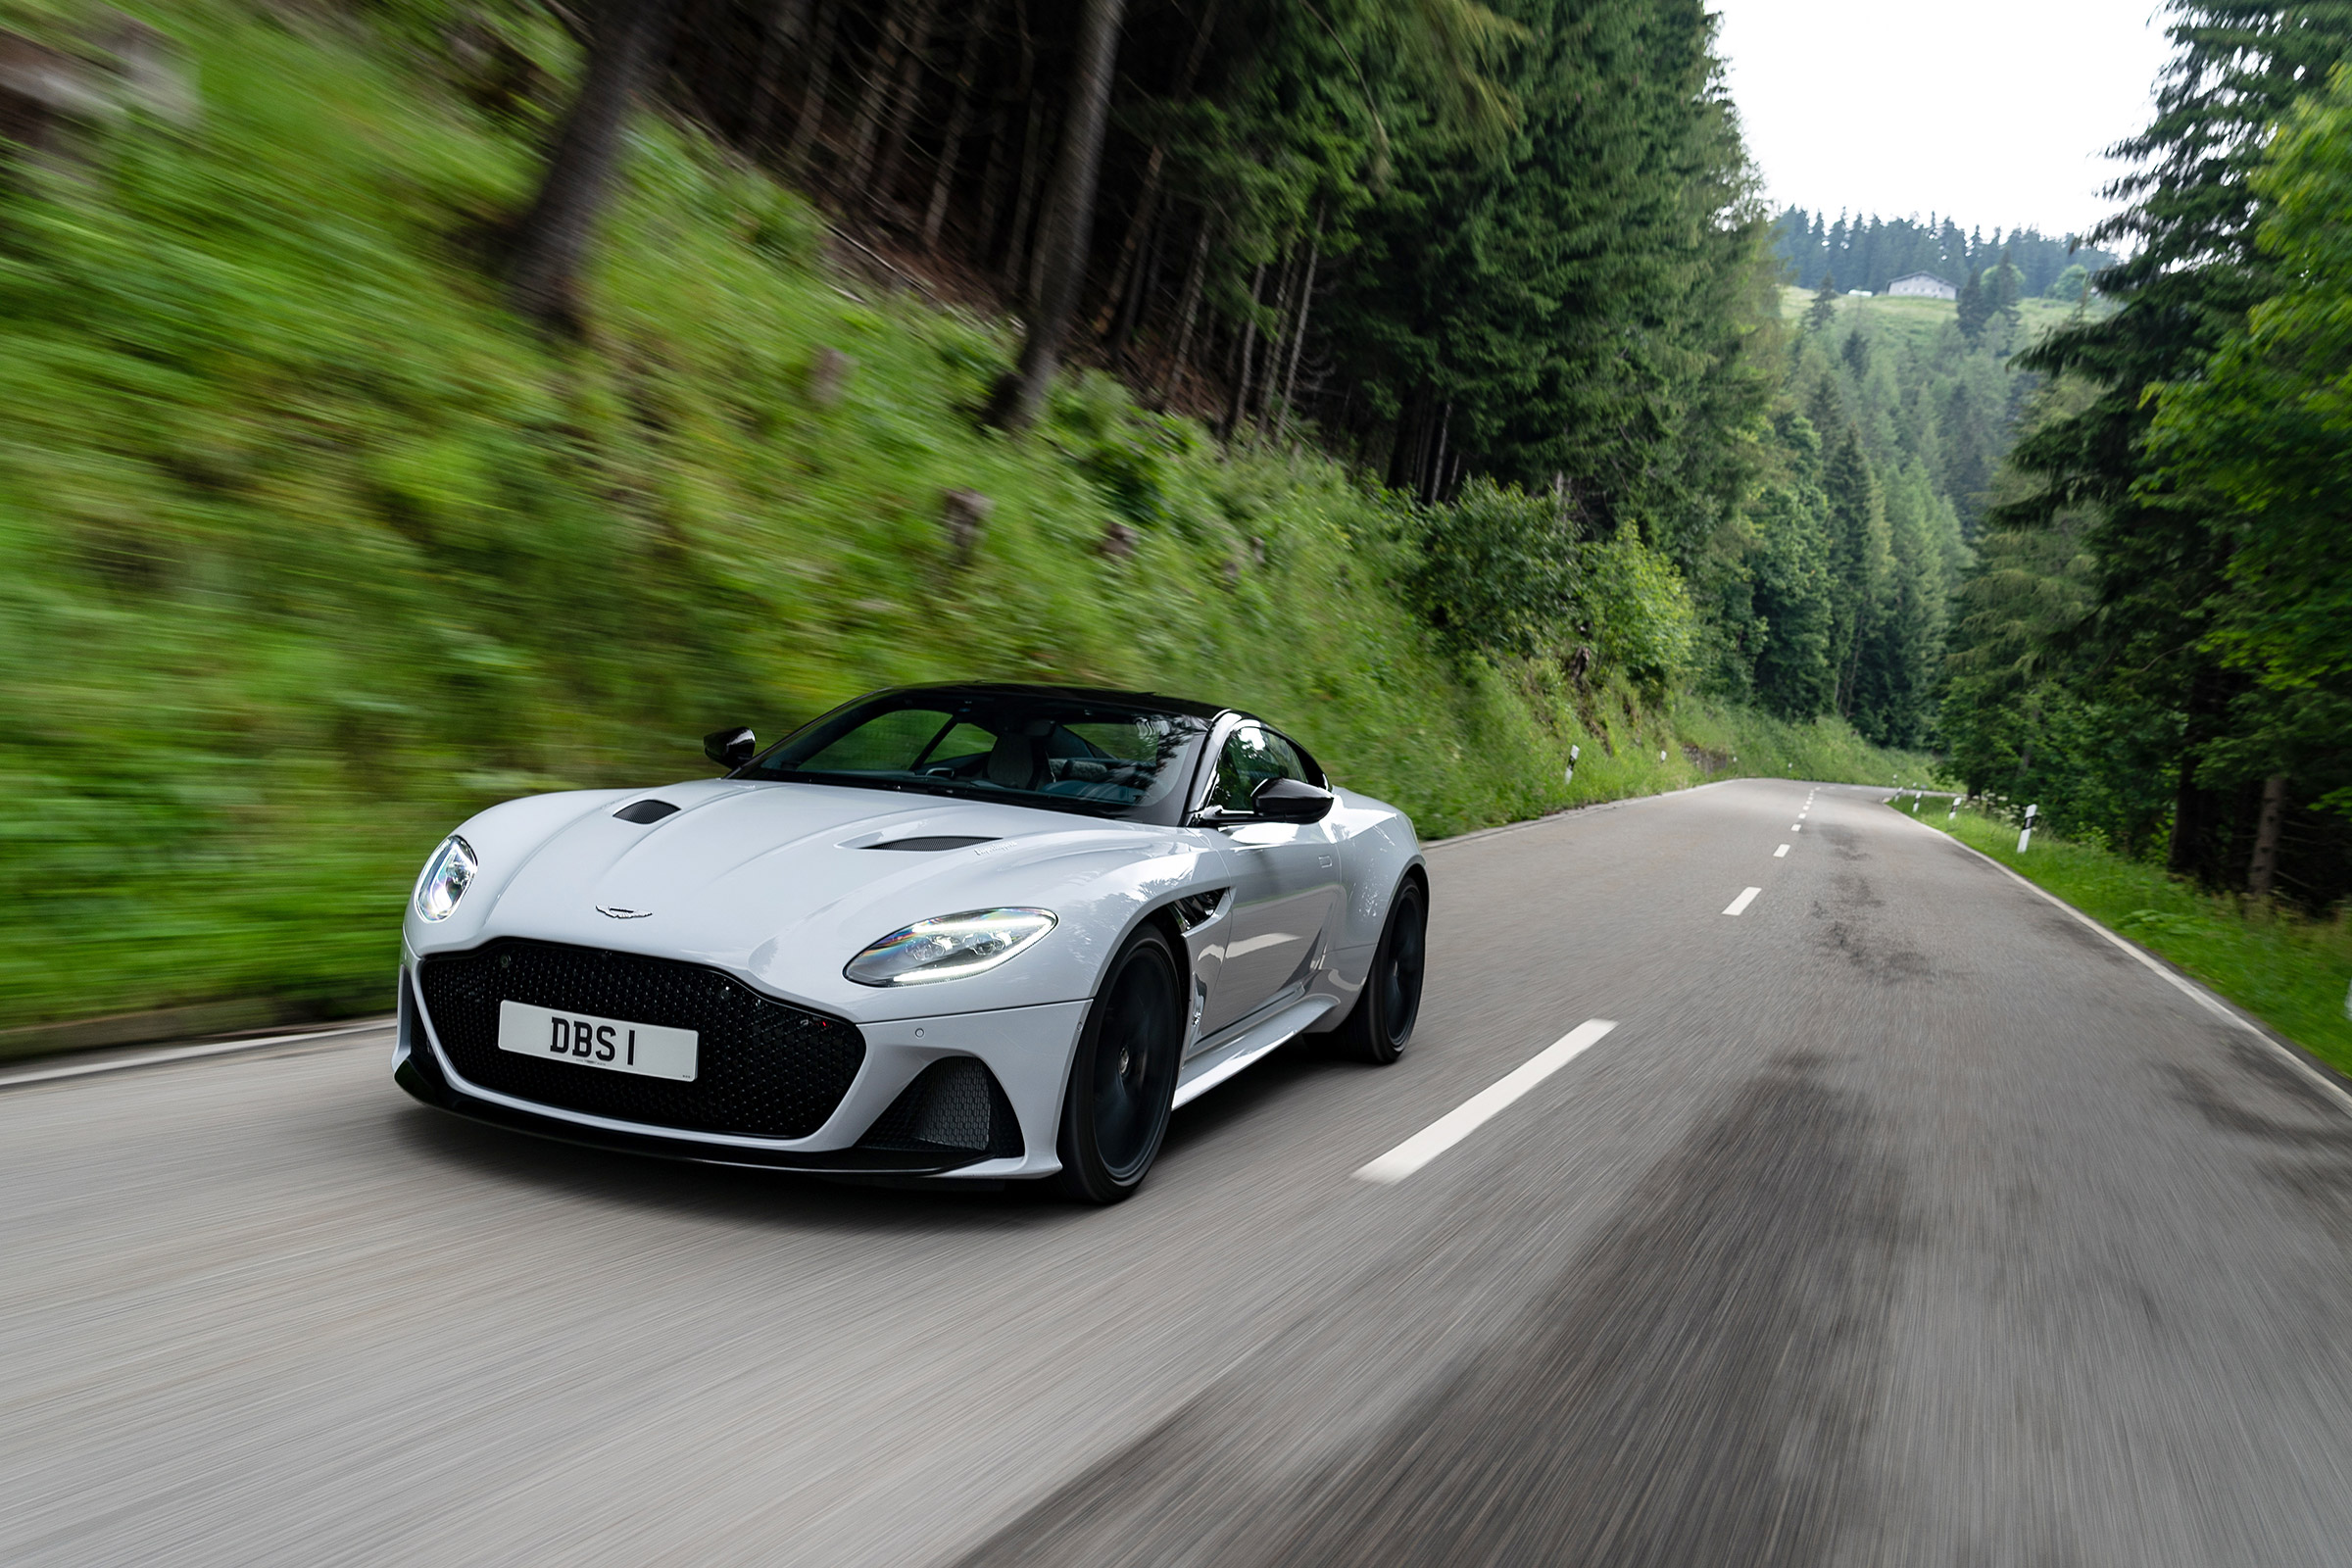 New Aston Martin DBS Superleggera review – a mighty V12 GT with